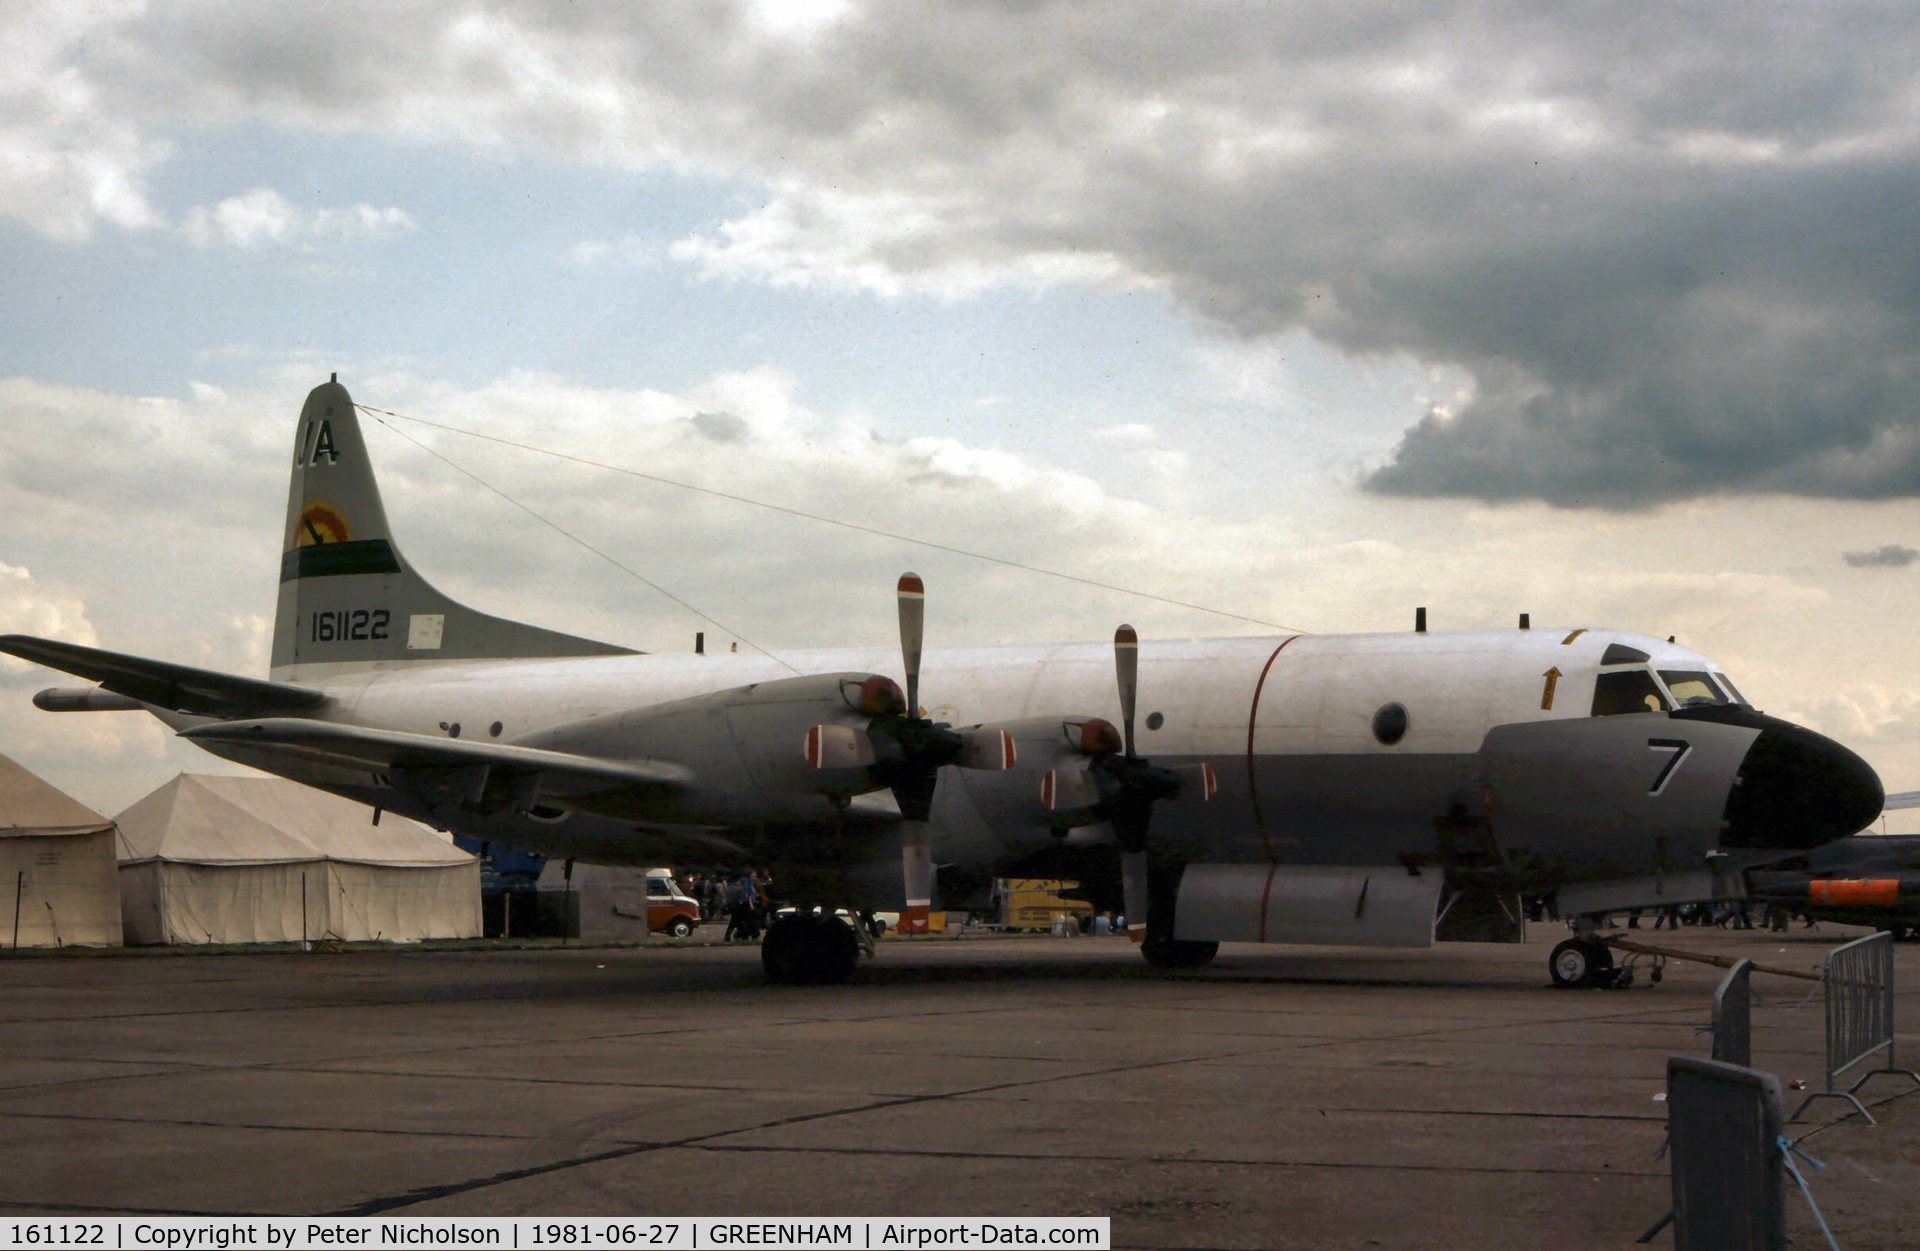 161122, 1980 Lockheed P-3C Orion C/N 285A-5701, P-3C Orion of Squadron VX-1 Air Test and Evaluation Squadron from NAS Patuxent River, Maryland on display at the 1981 Intnl Air Tattoo at RAF Greenham Common.